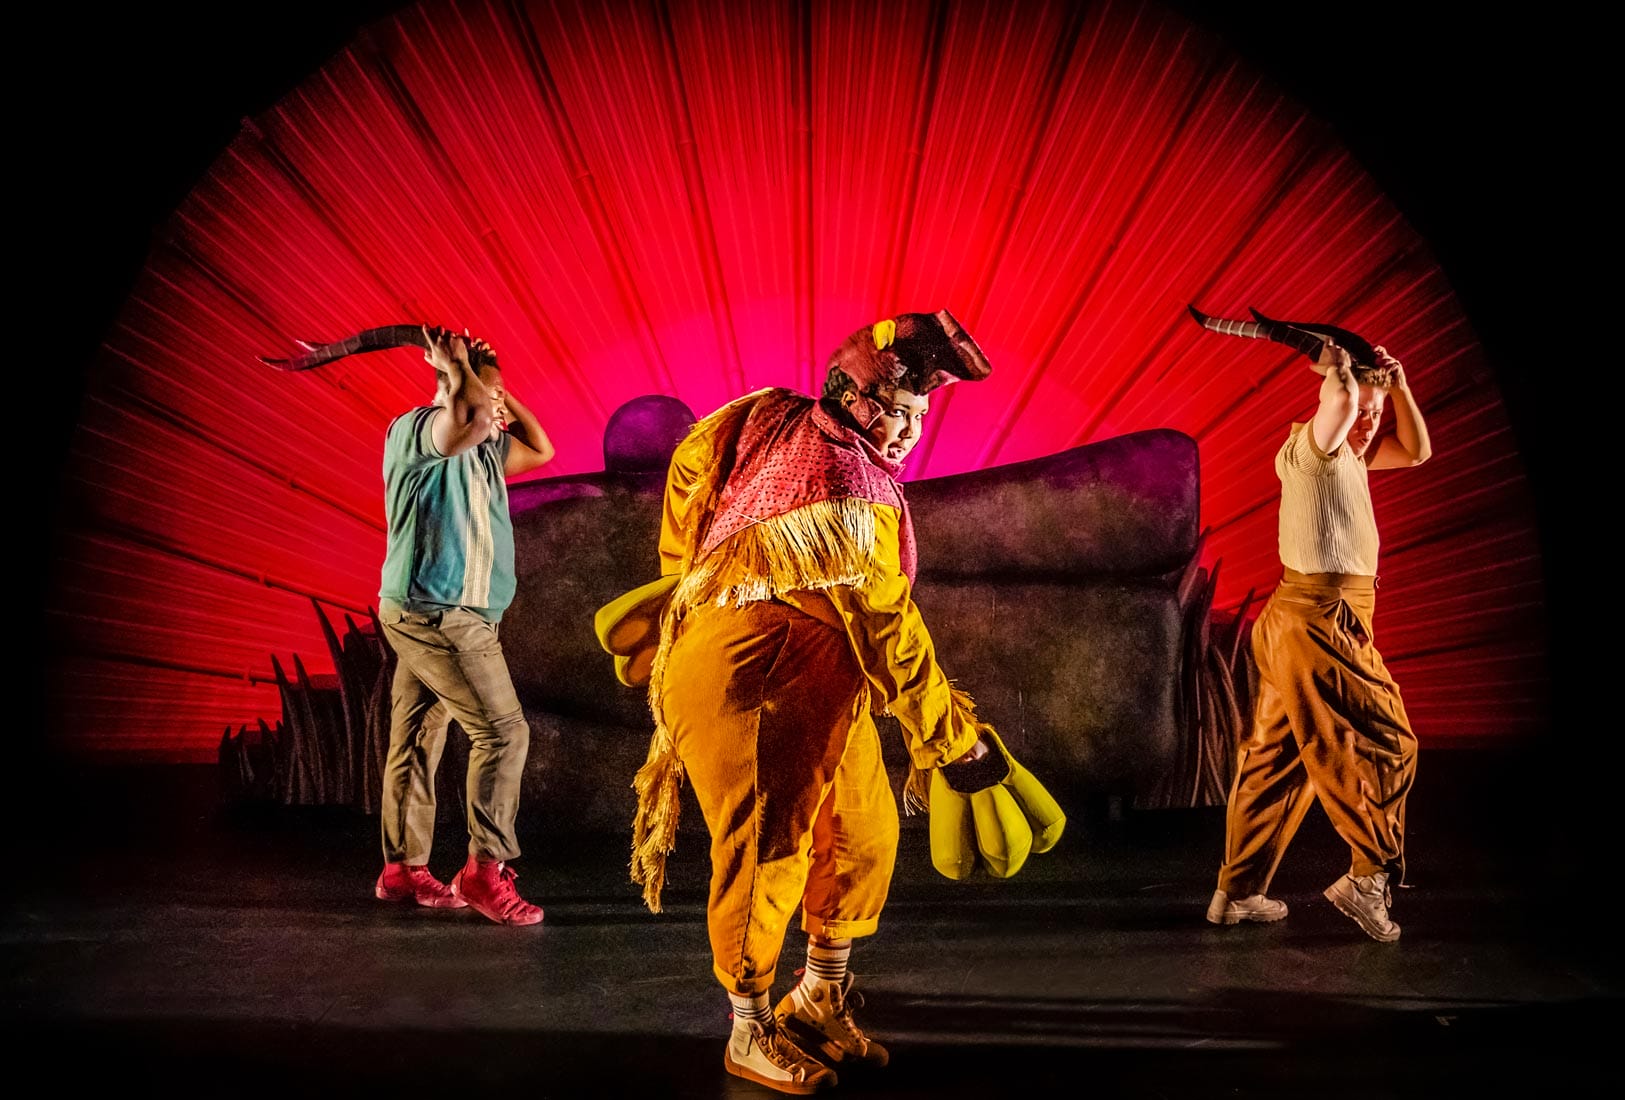 All characters doing a dance facing the audience against a red background.